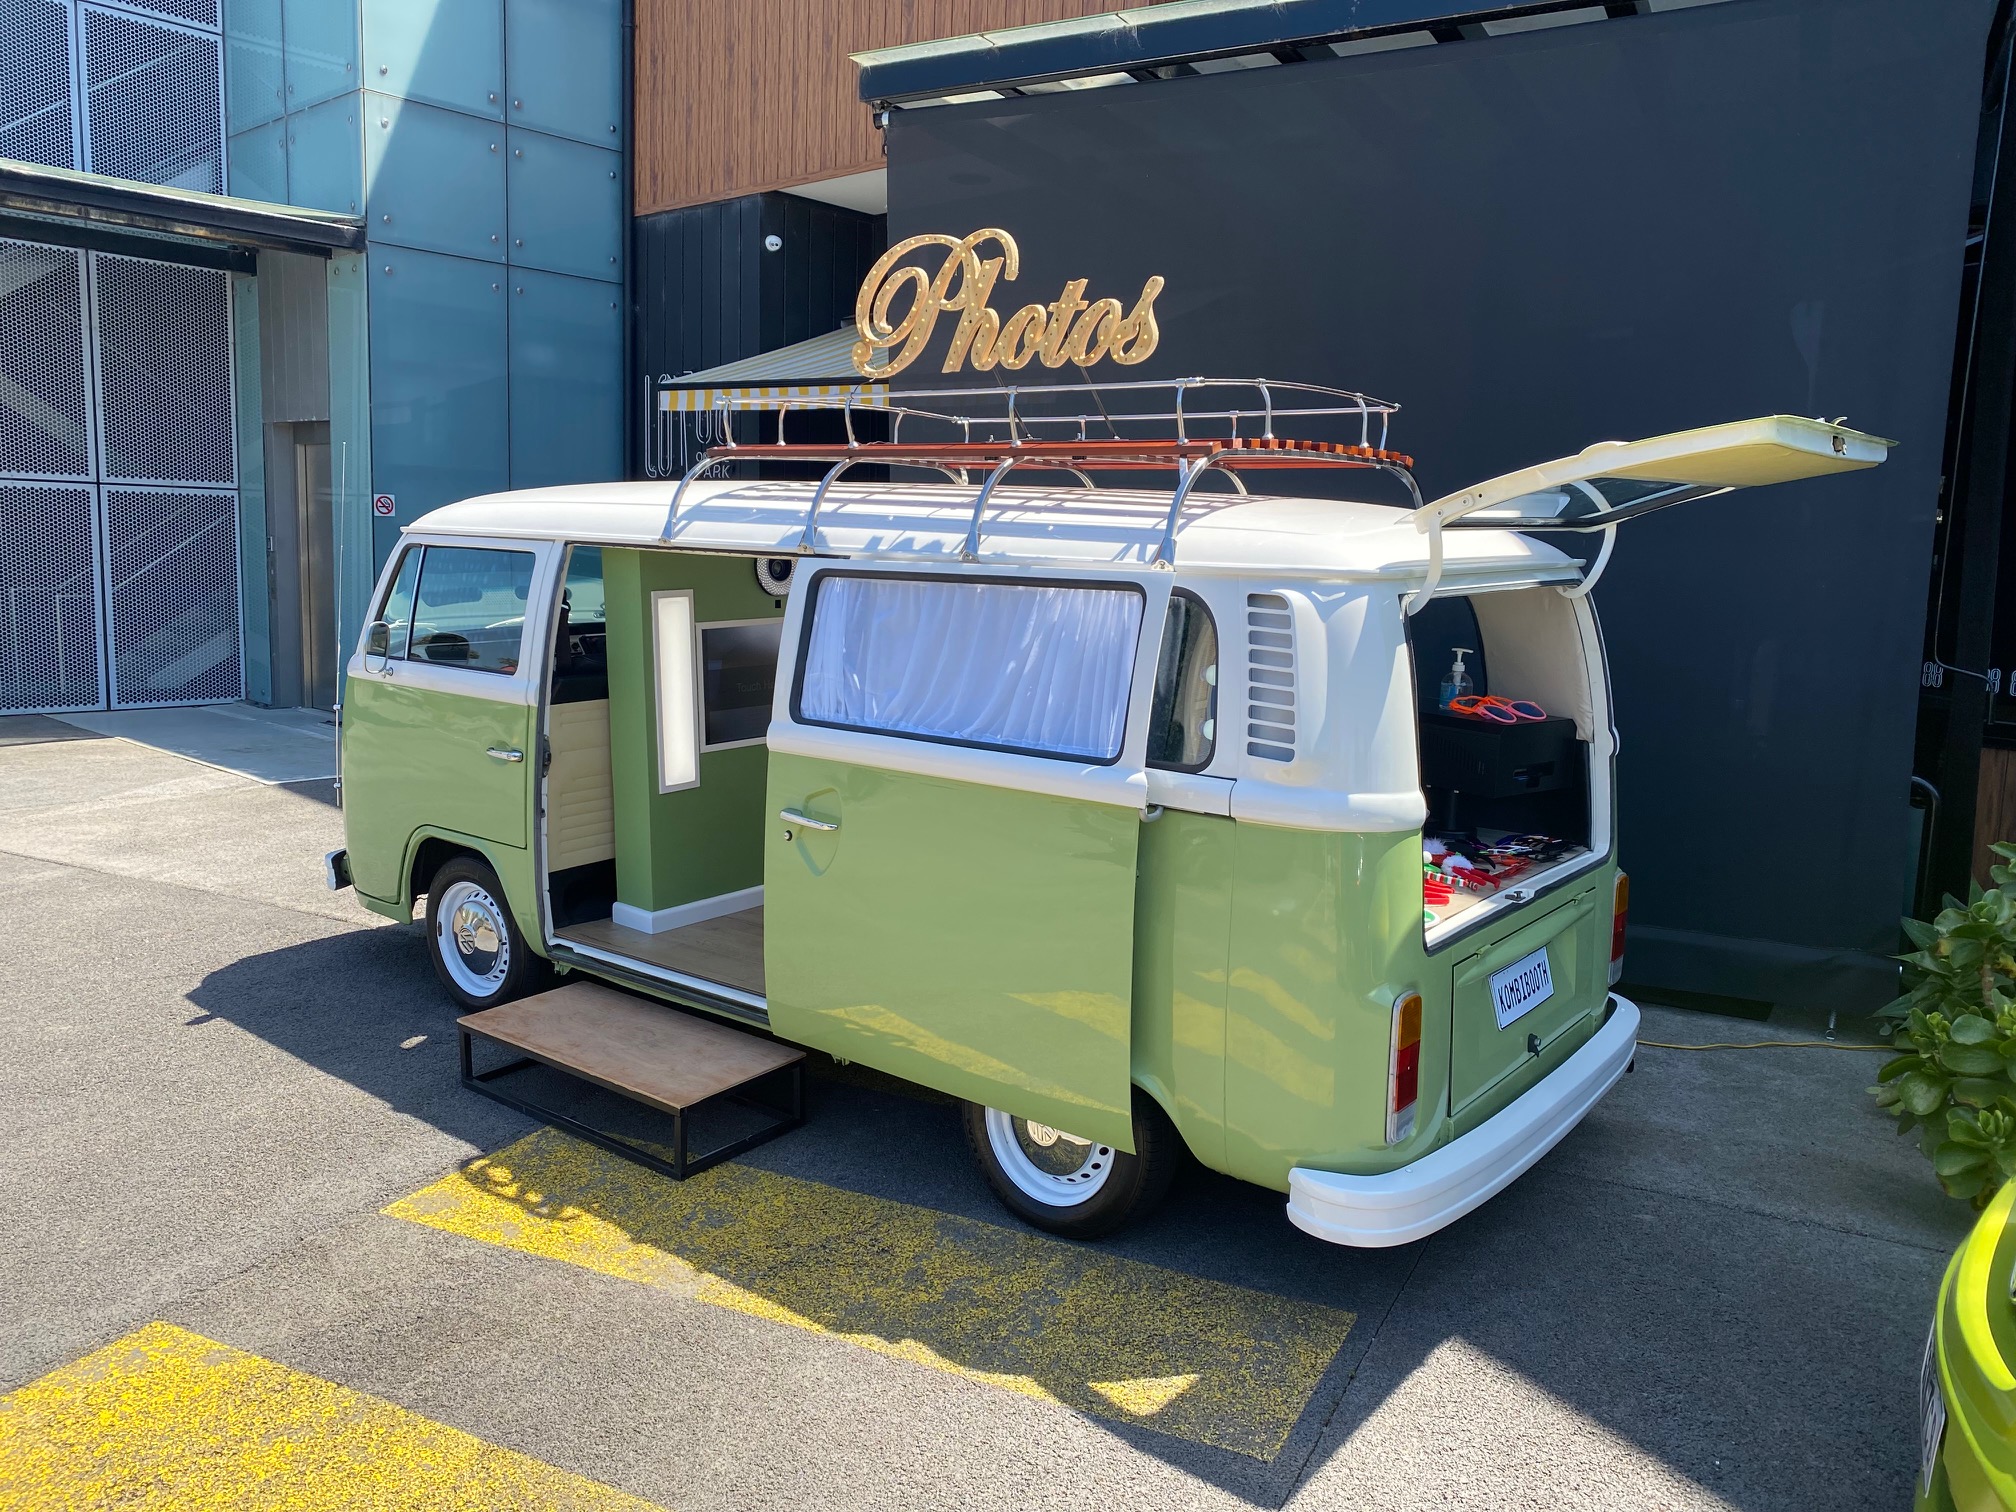 The Kombi Photo Booth Melbourne